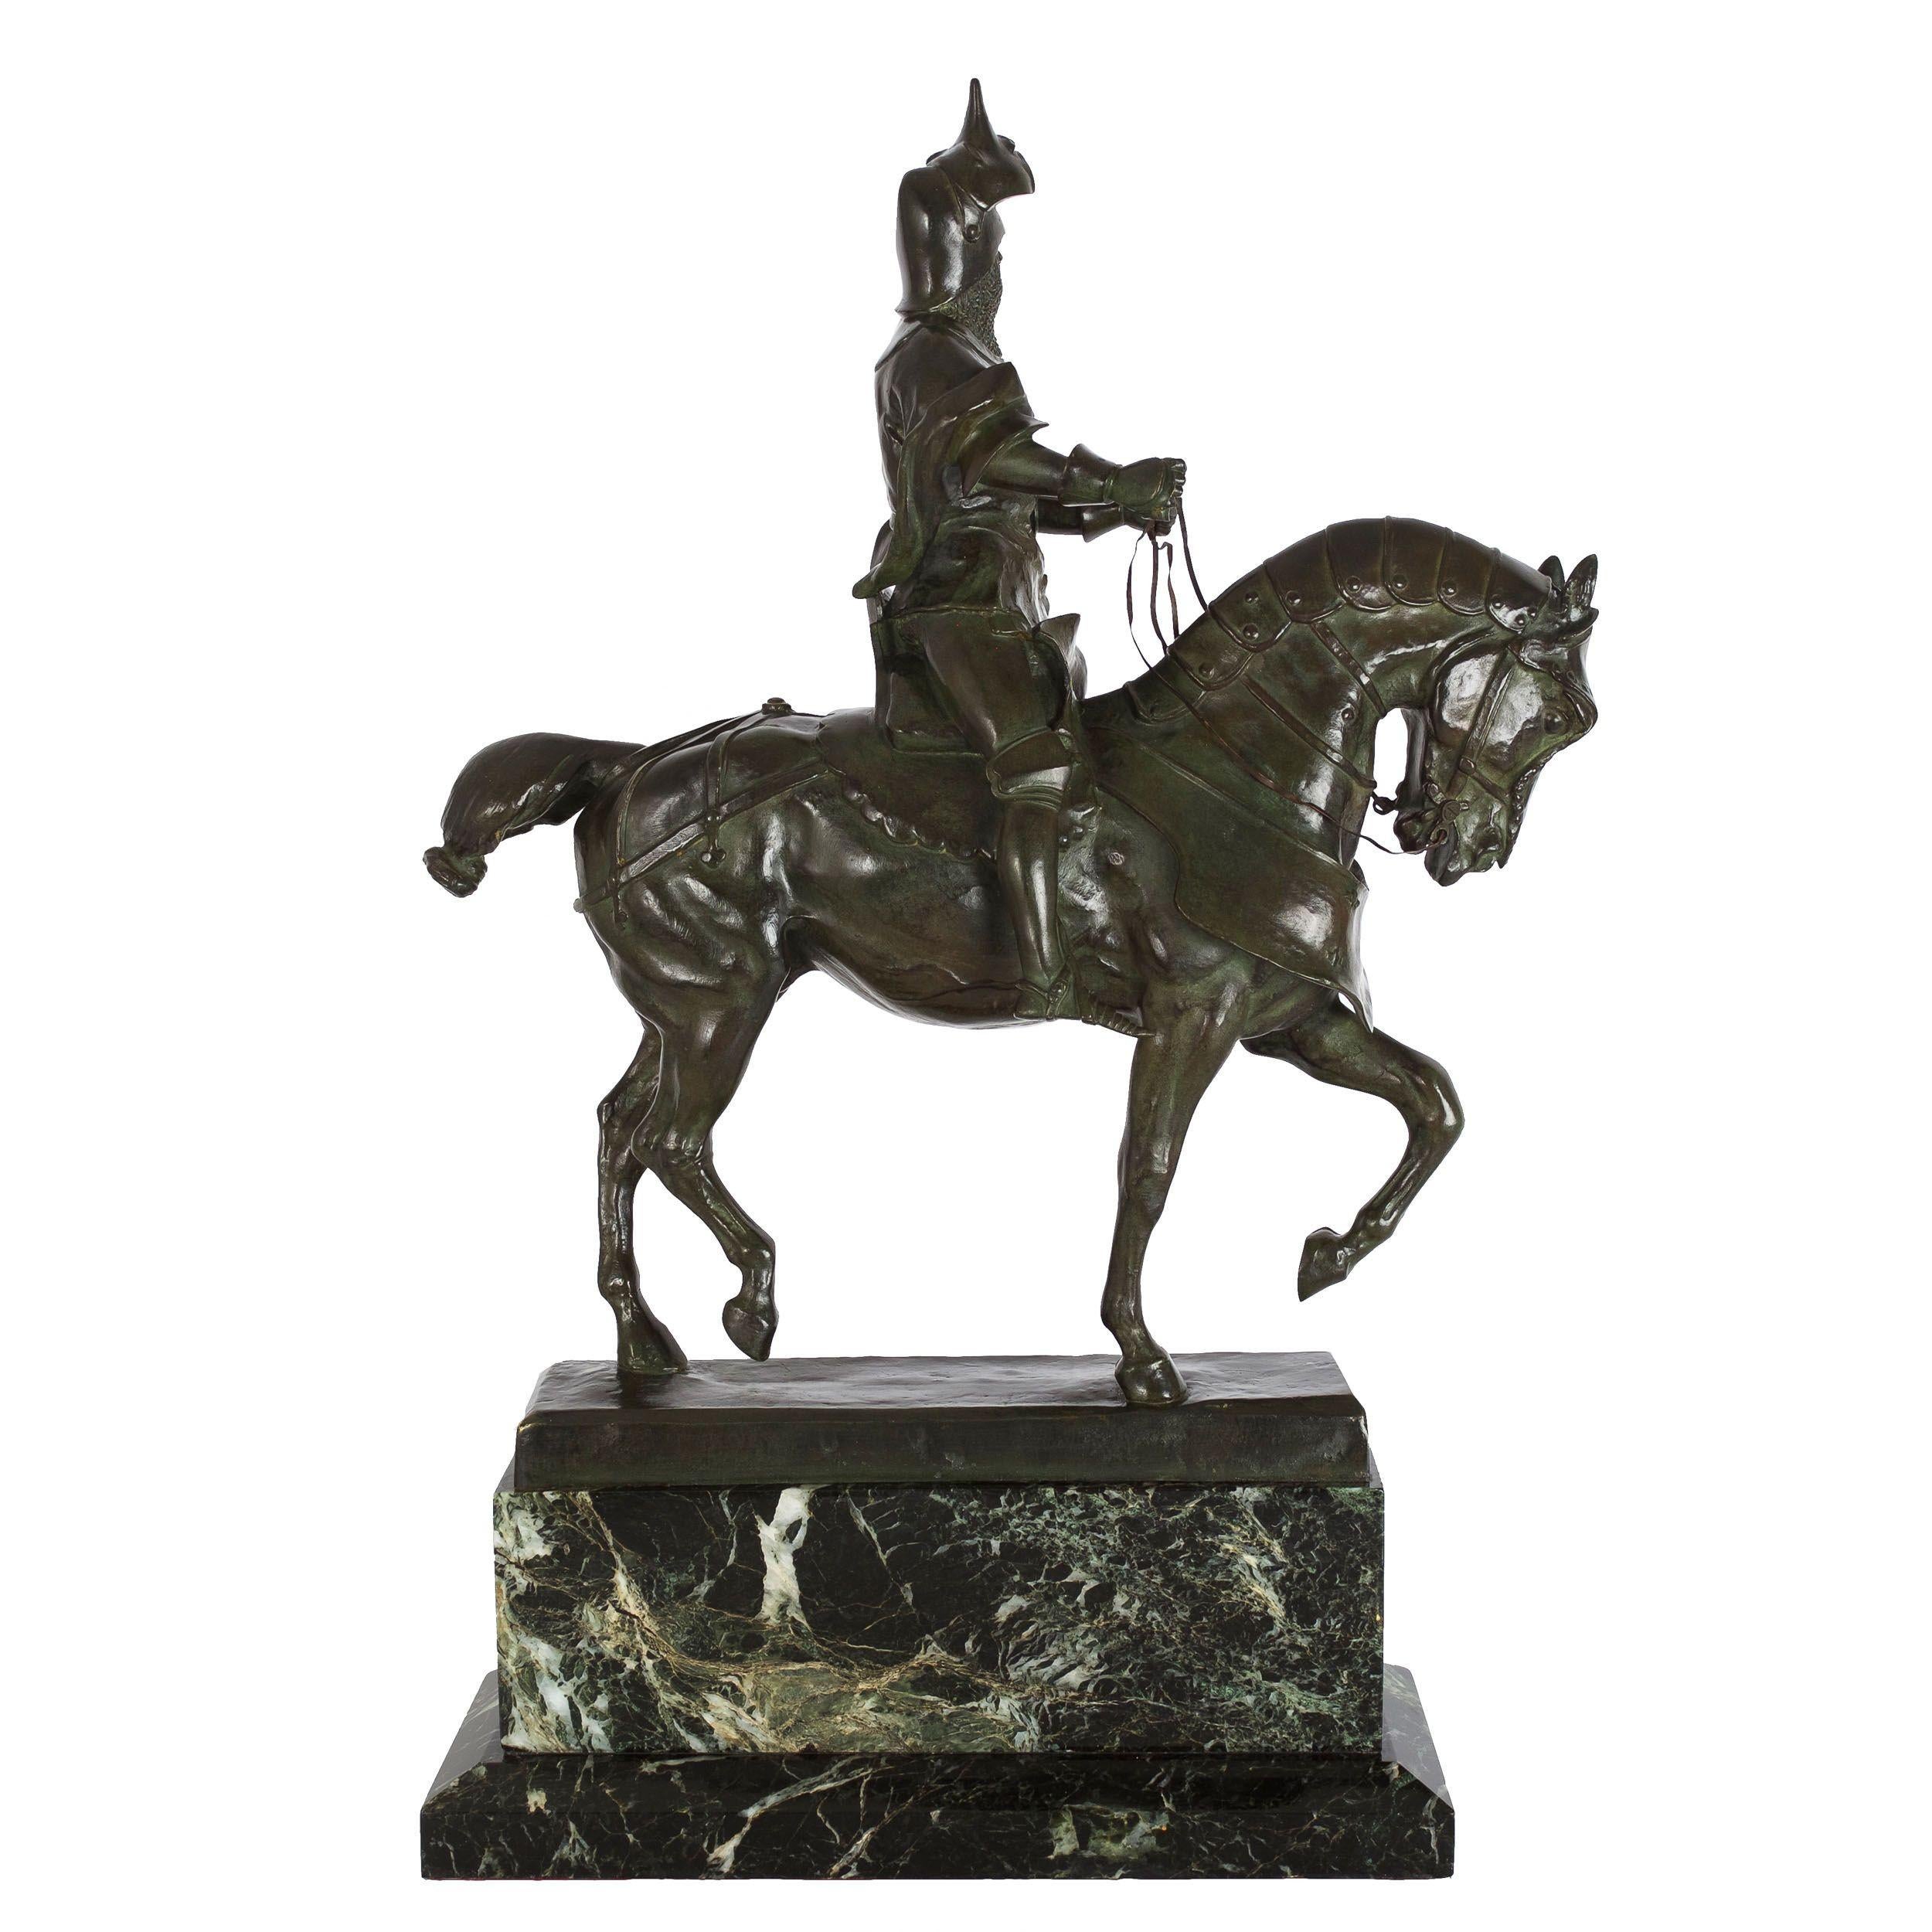 An exquisite casting of a Knight on Horseback after the model by Alfred Barye, it is an exacting and powerful representation of both horse and rider and we are unaware of any other recorded castings of this model. While Alfred always lived in the